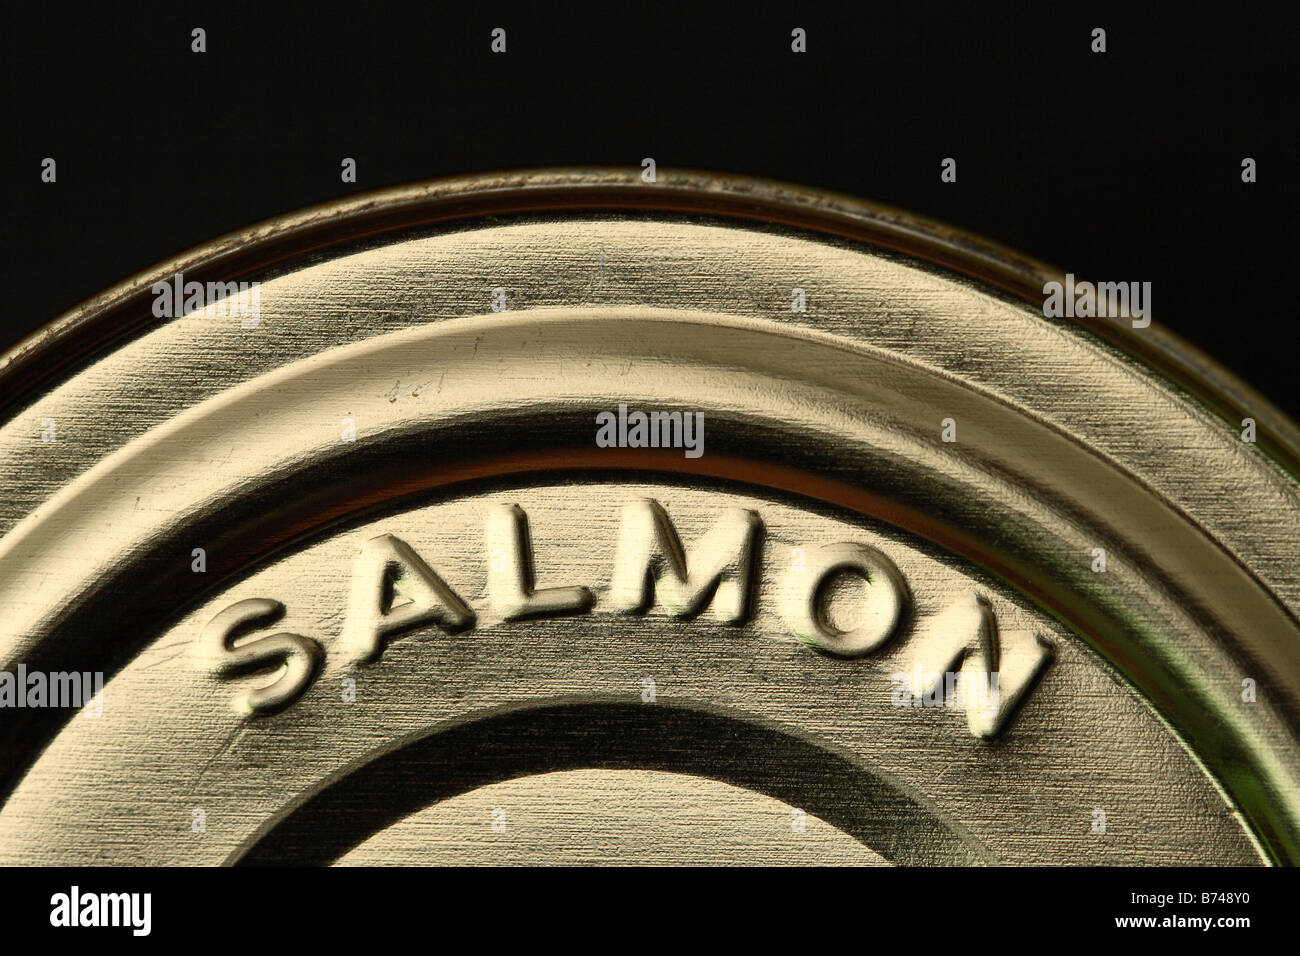 Salmon - Steel tin food can container marked Salmon fish produce with black background for copyspace Stock Photo